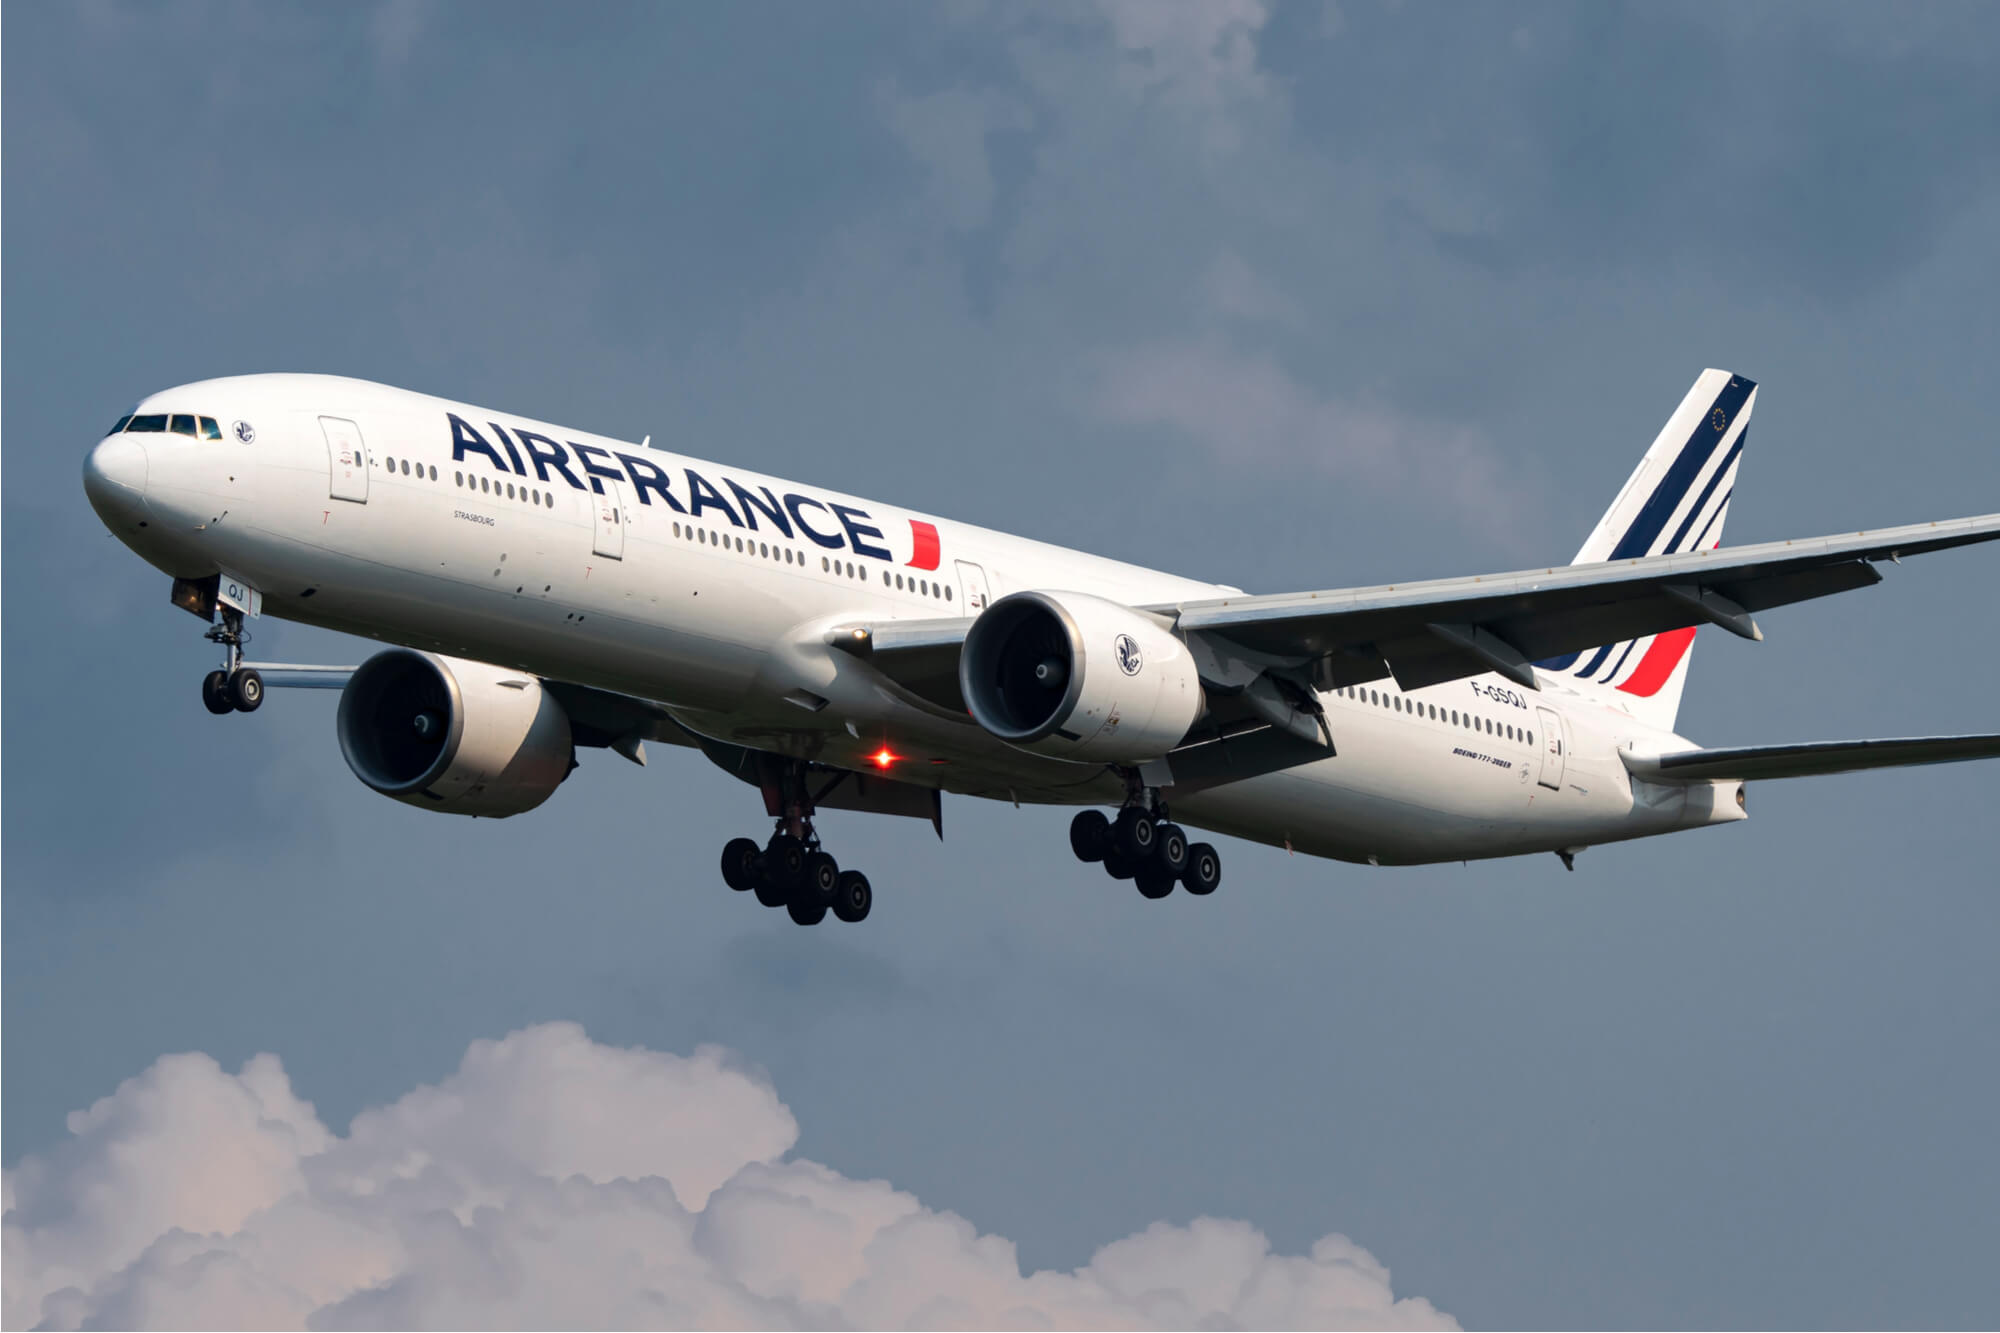 Confusion Over The Controls Update On The Air France 777 Approach